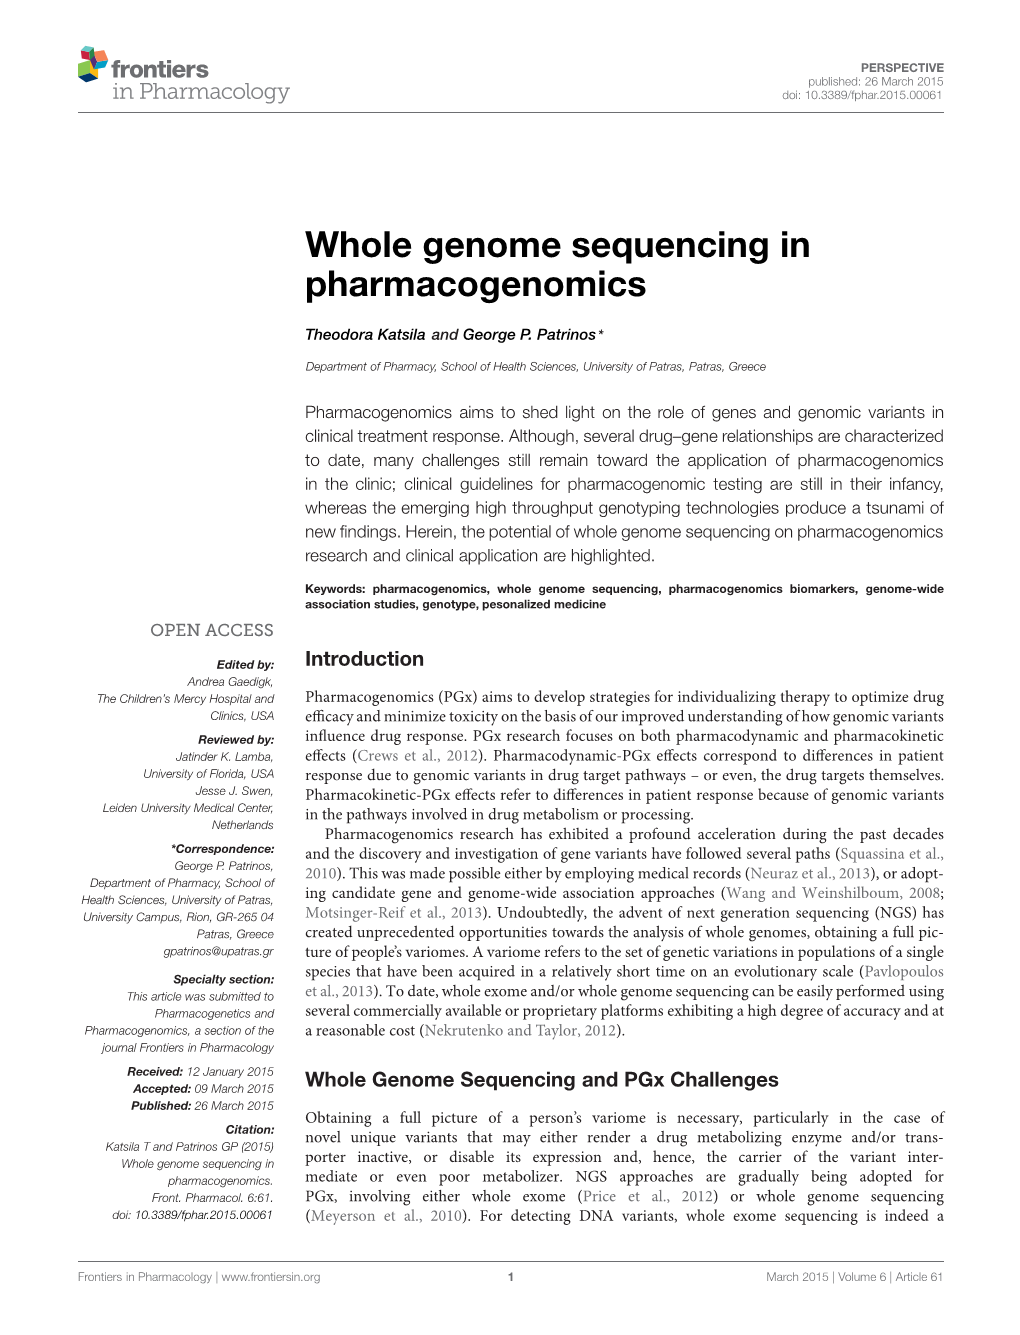 Whole Genome Sequencing in Pharmacogenomics